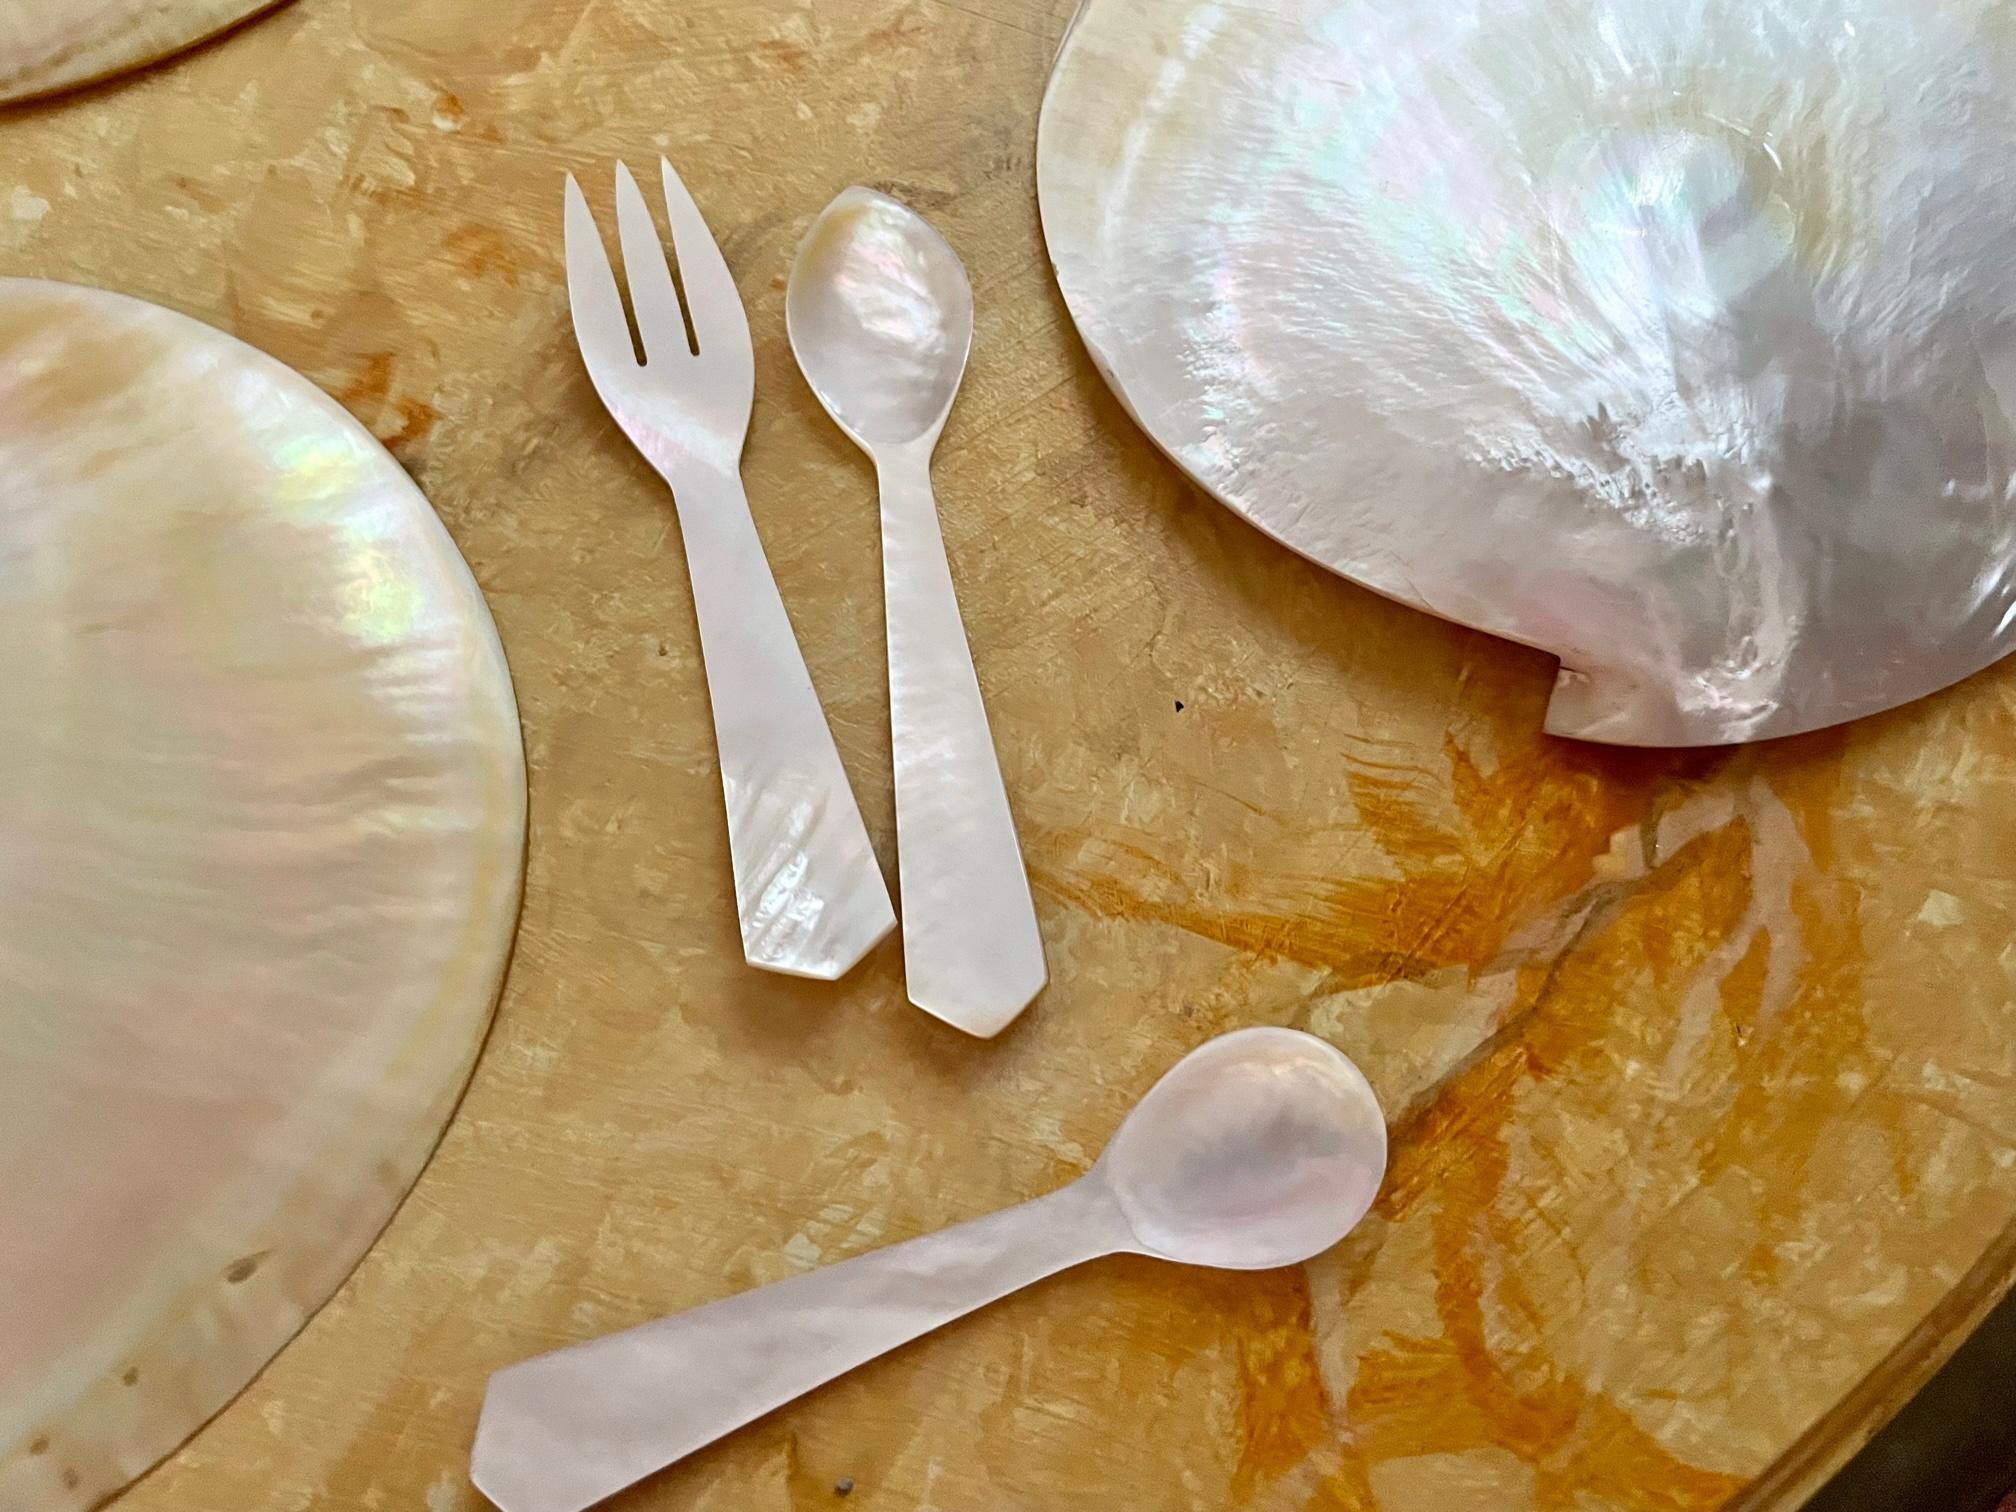 Mother of Pearl Seashell Caviar Dish with Cutlery, 8 Complete Sets 2